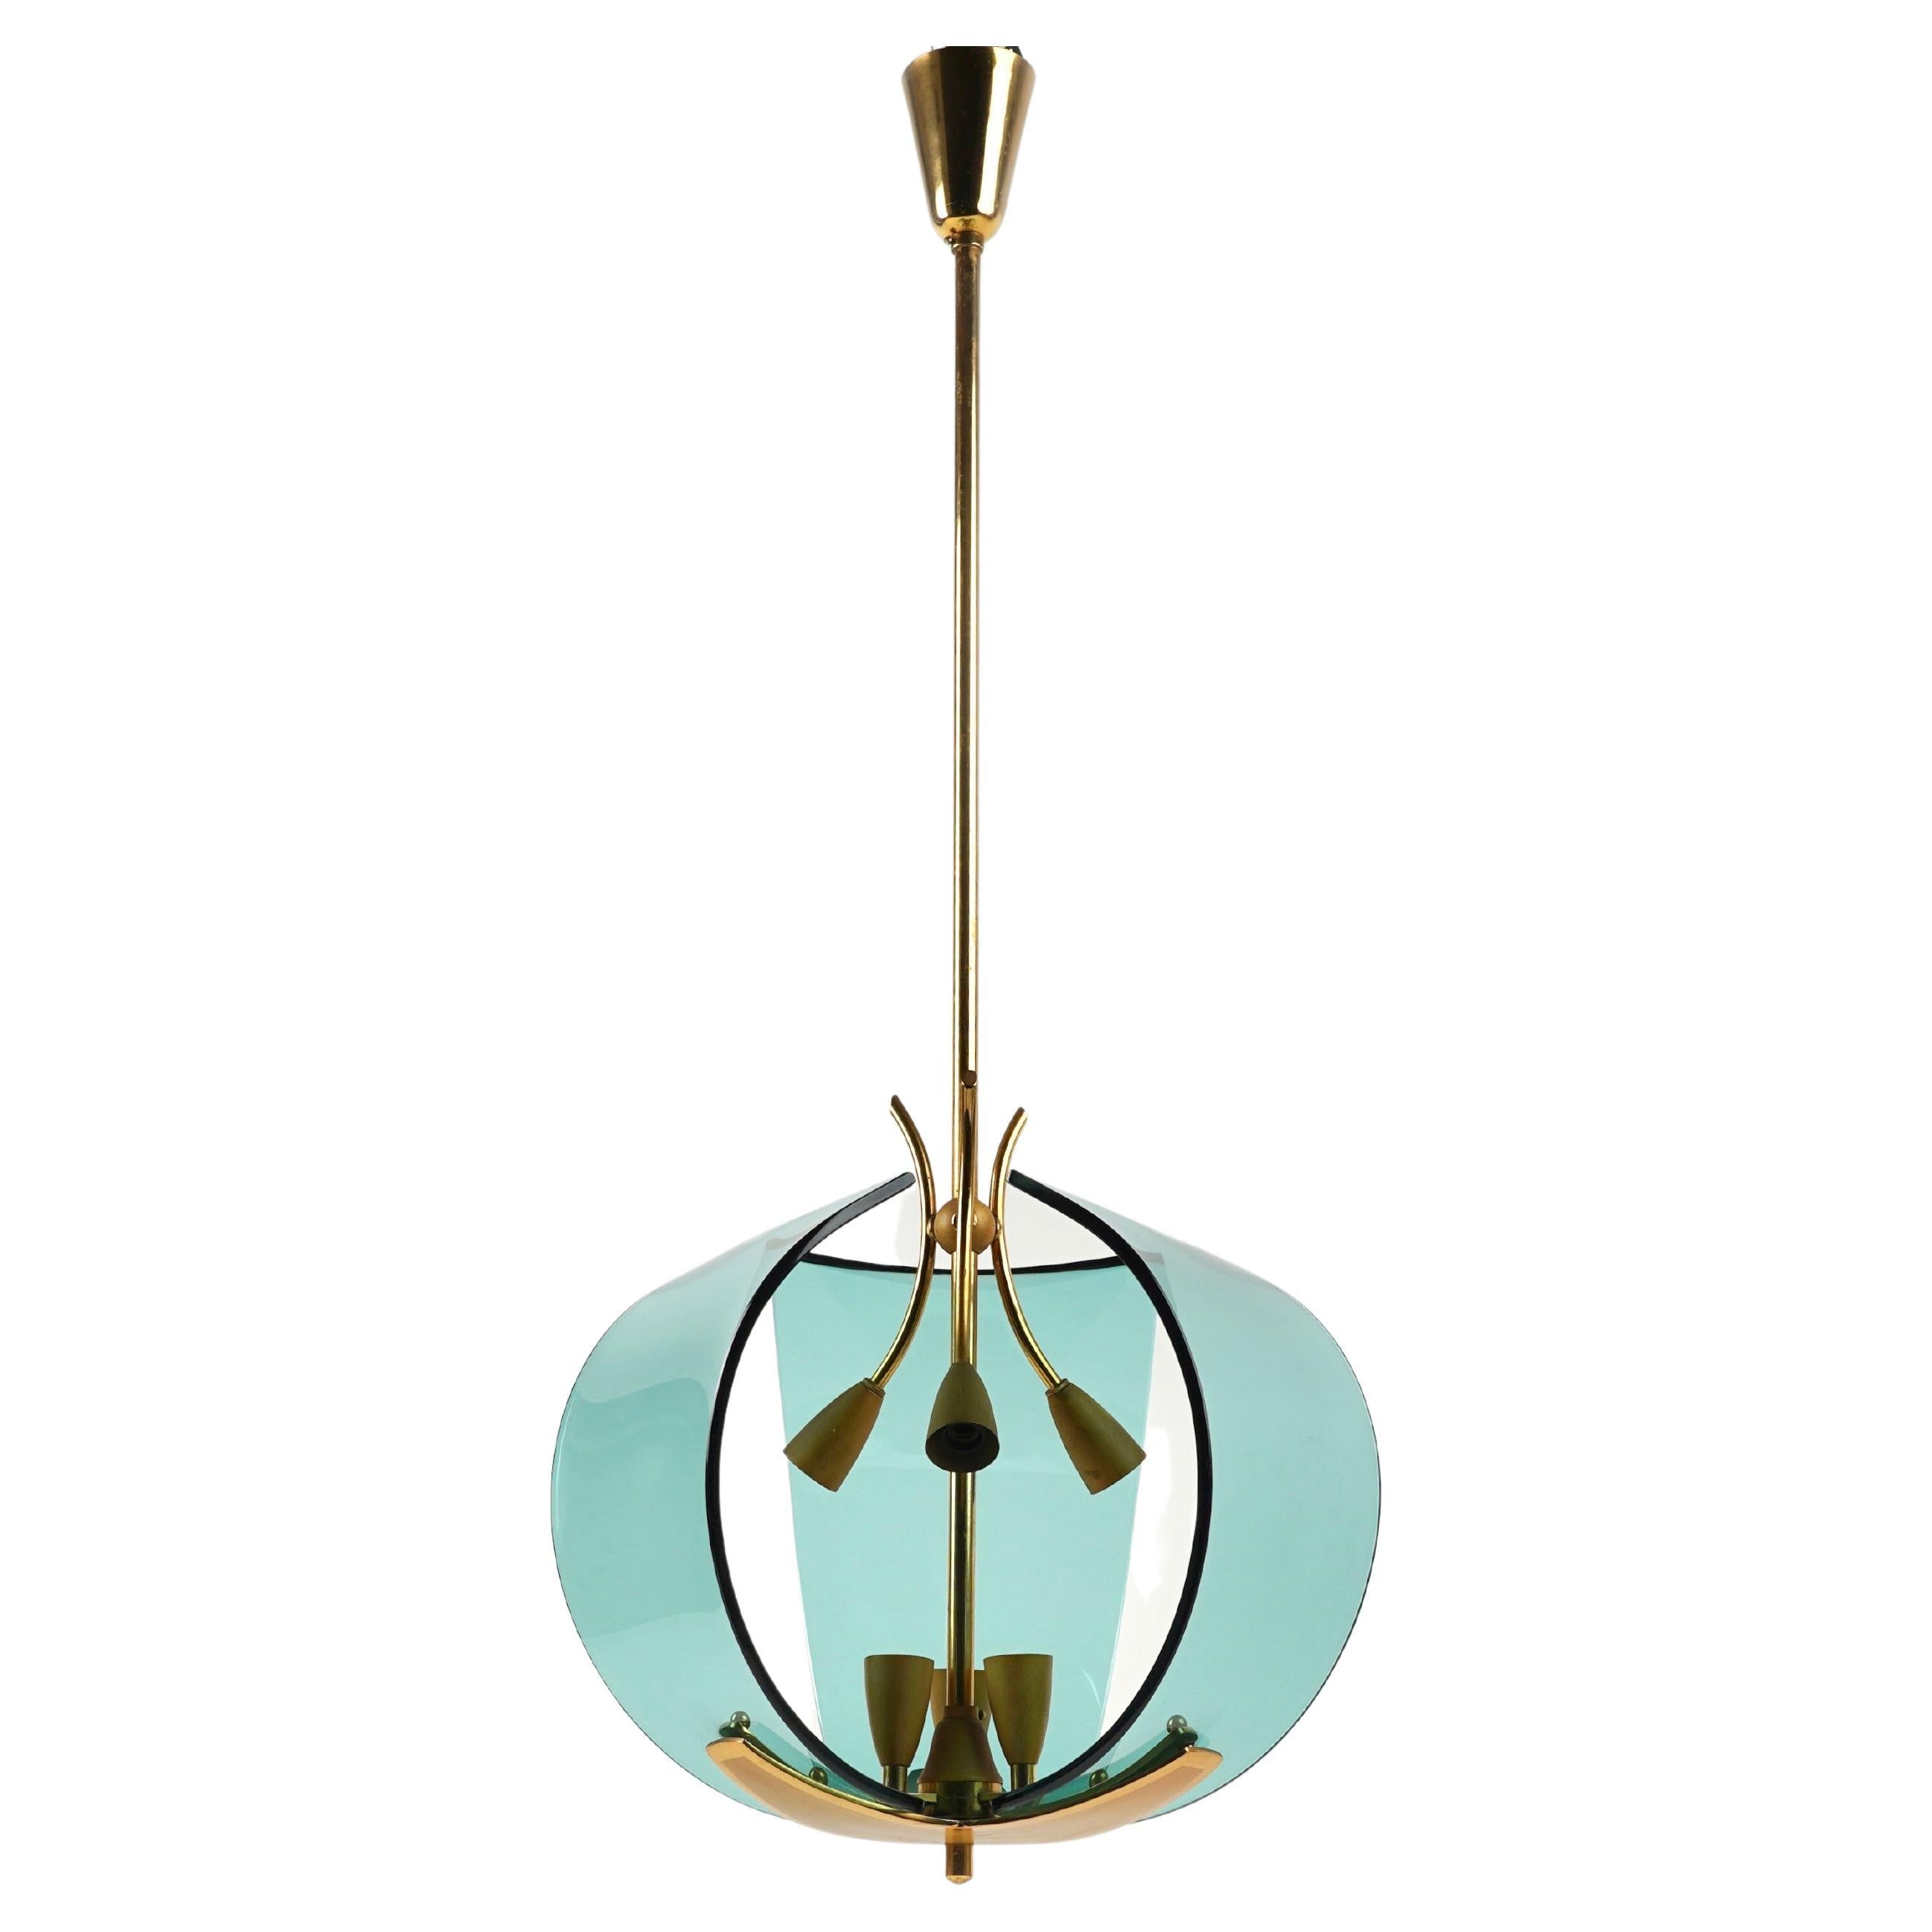 Midcentury Chandelier in Brass and Glass by Fontana Arte, Italy, 1950s